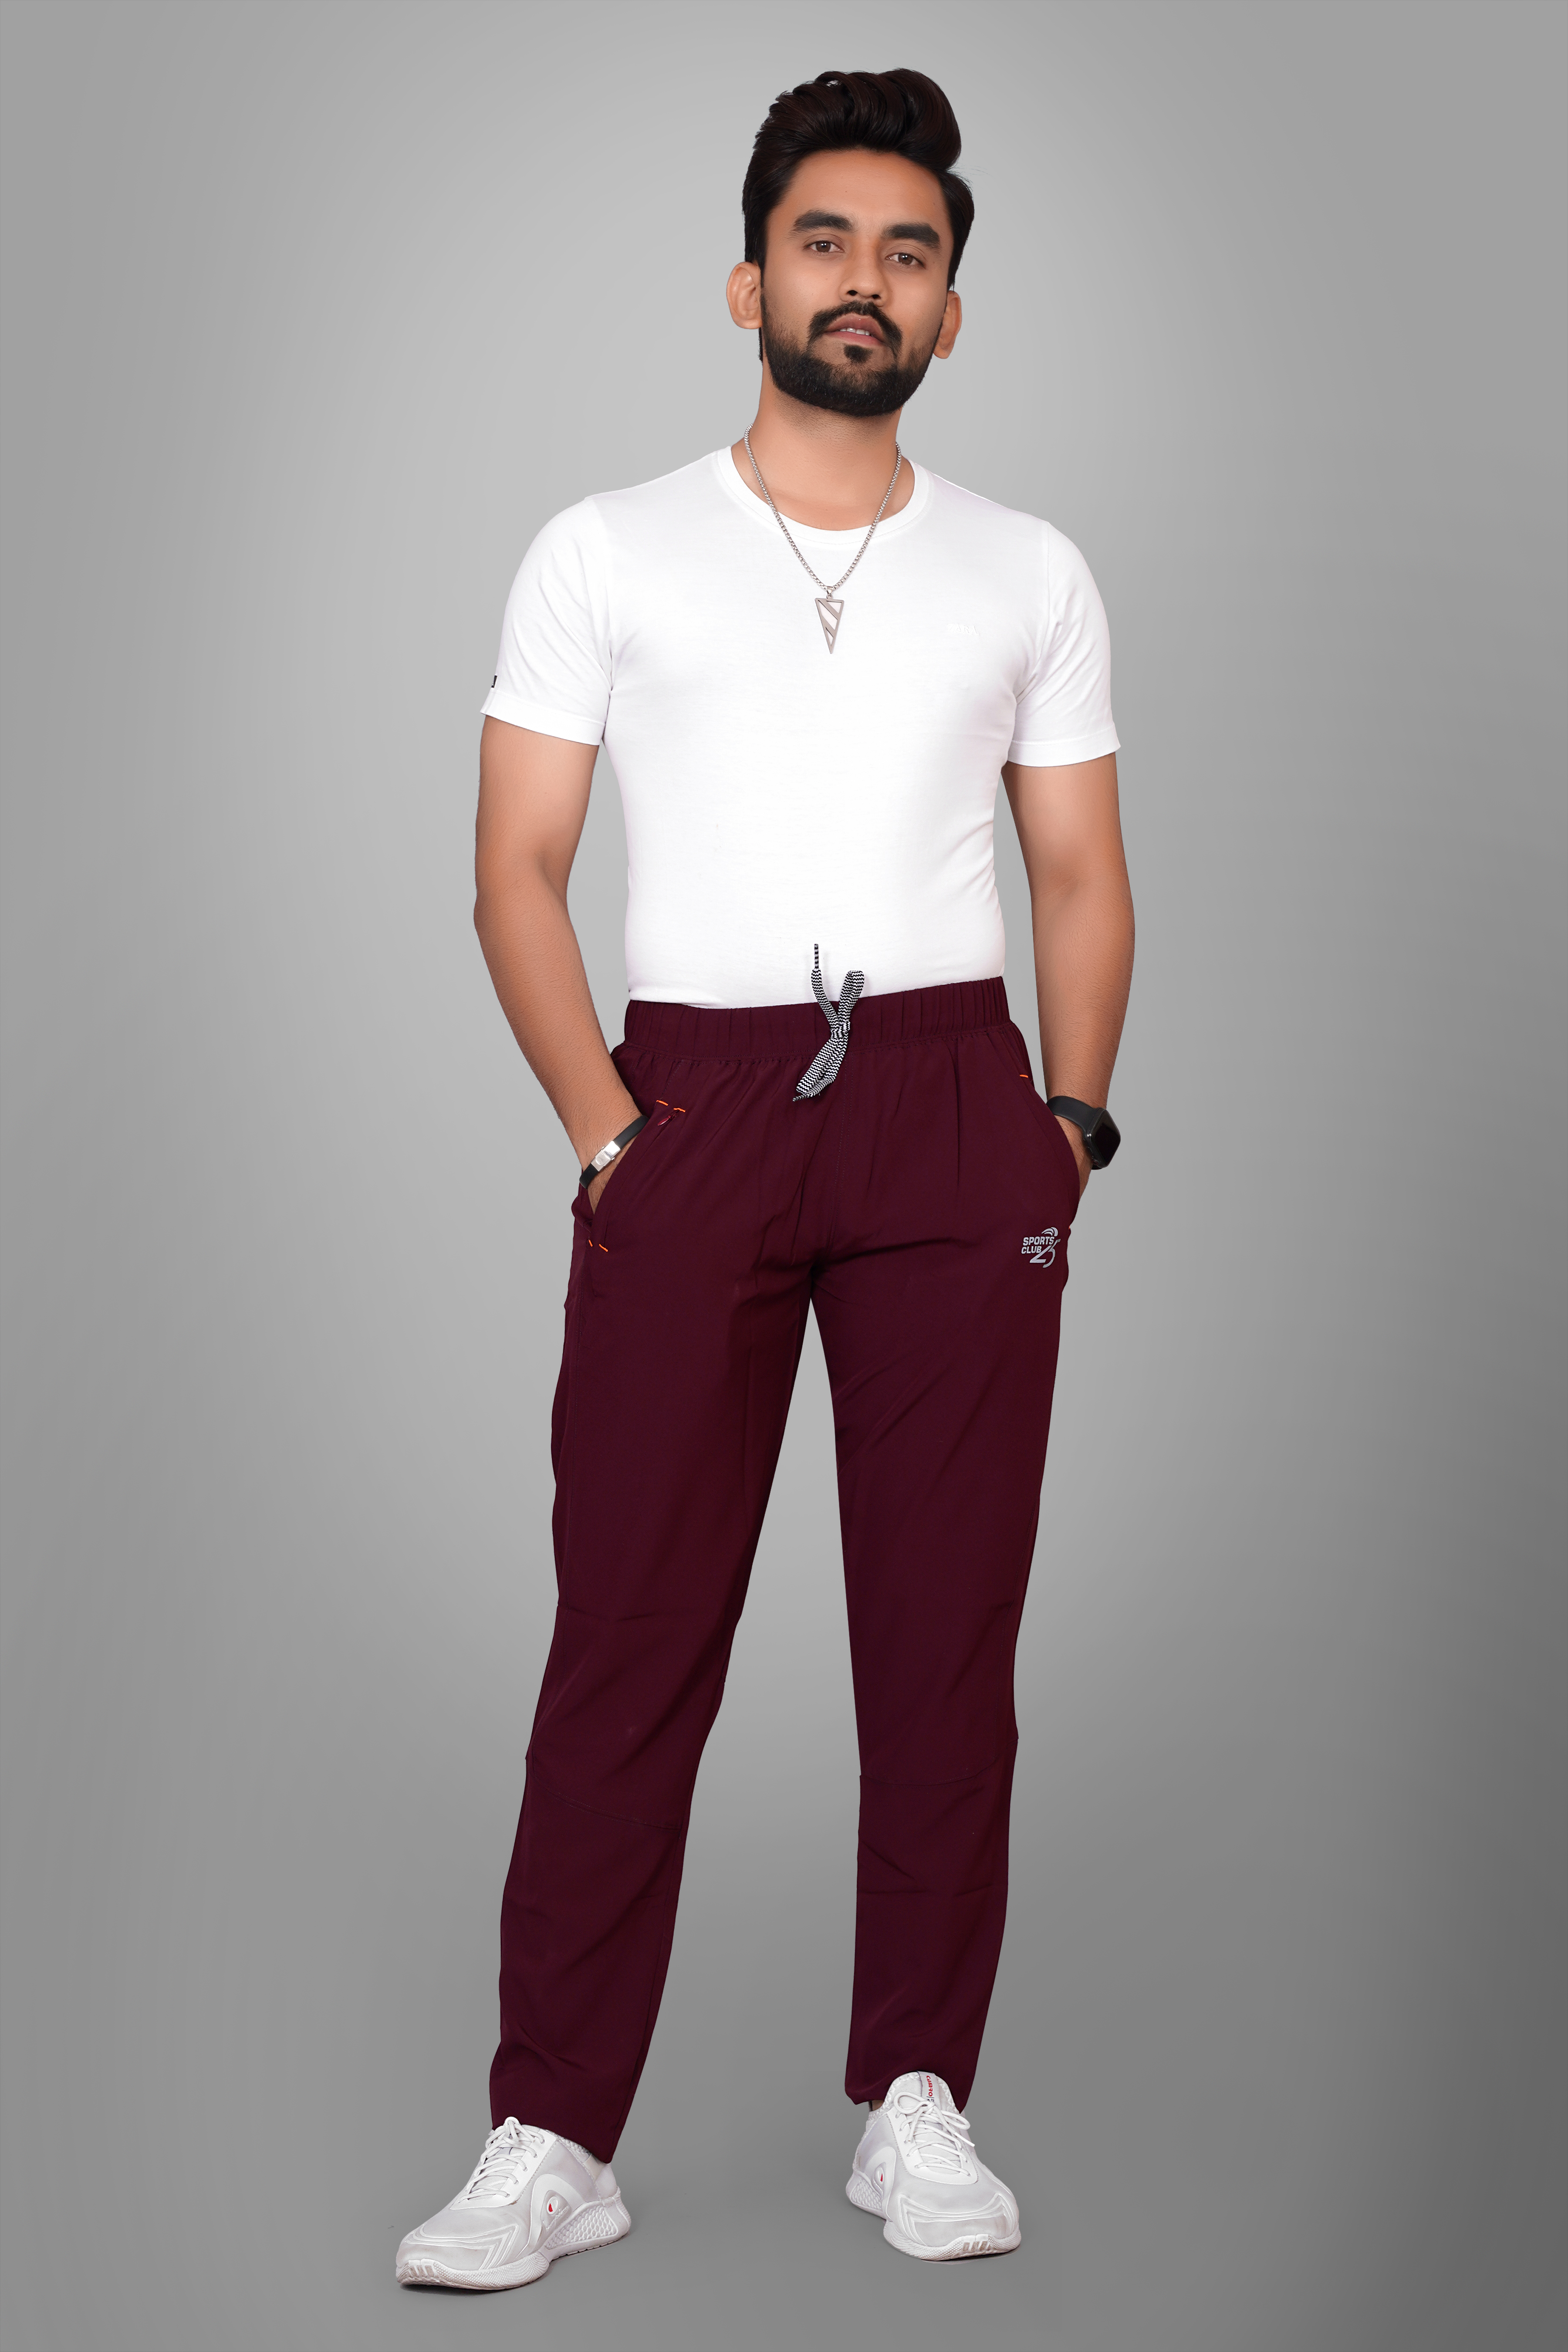 mens maroon track pants in india